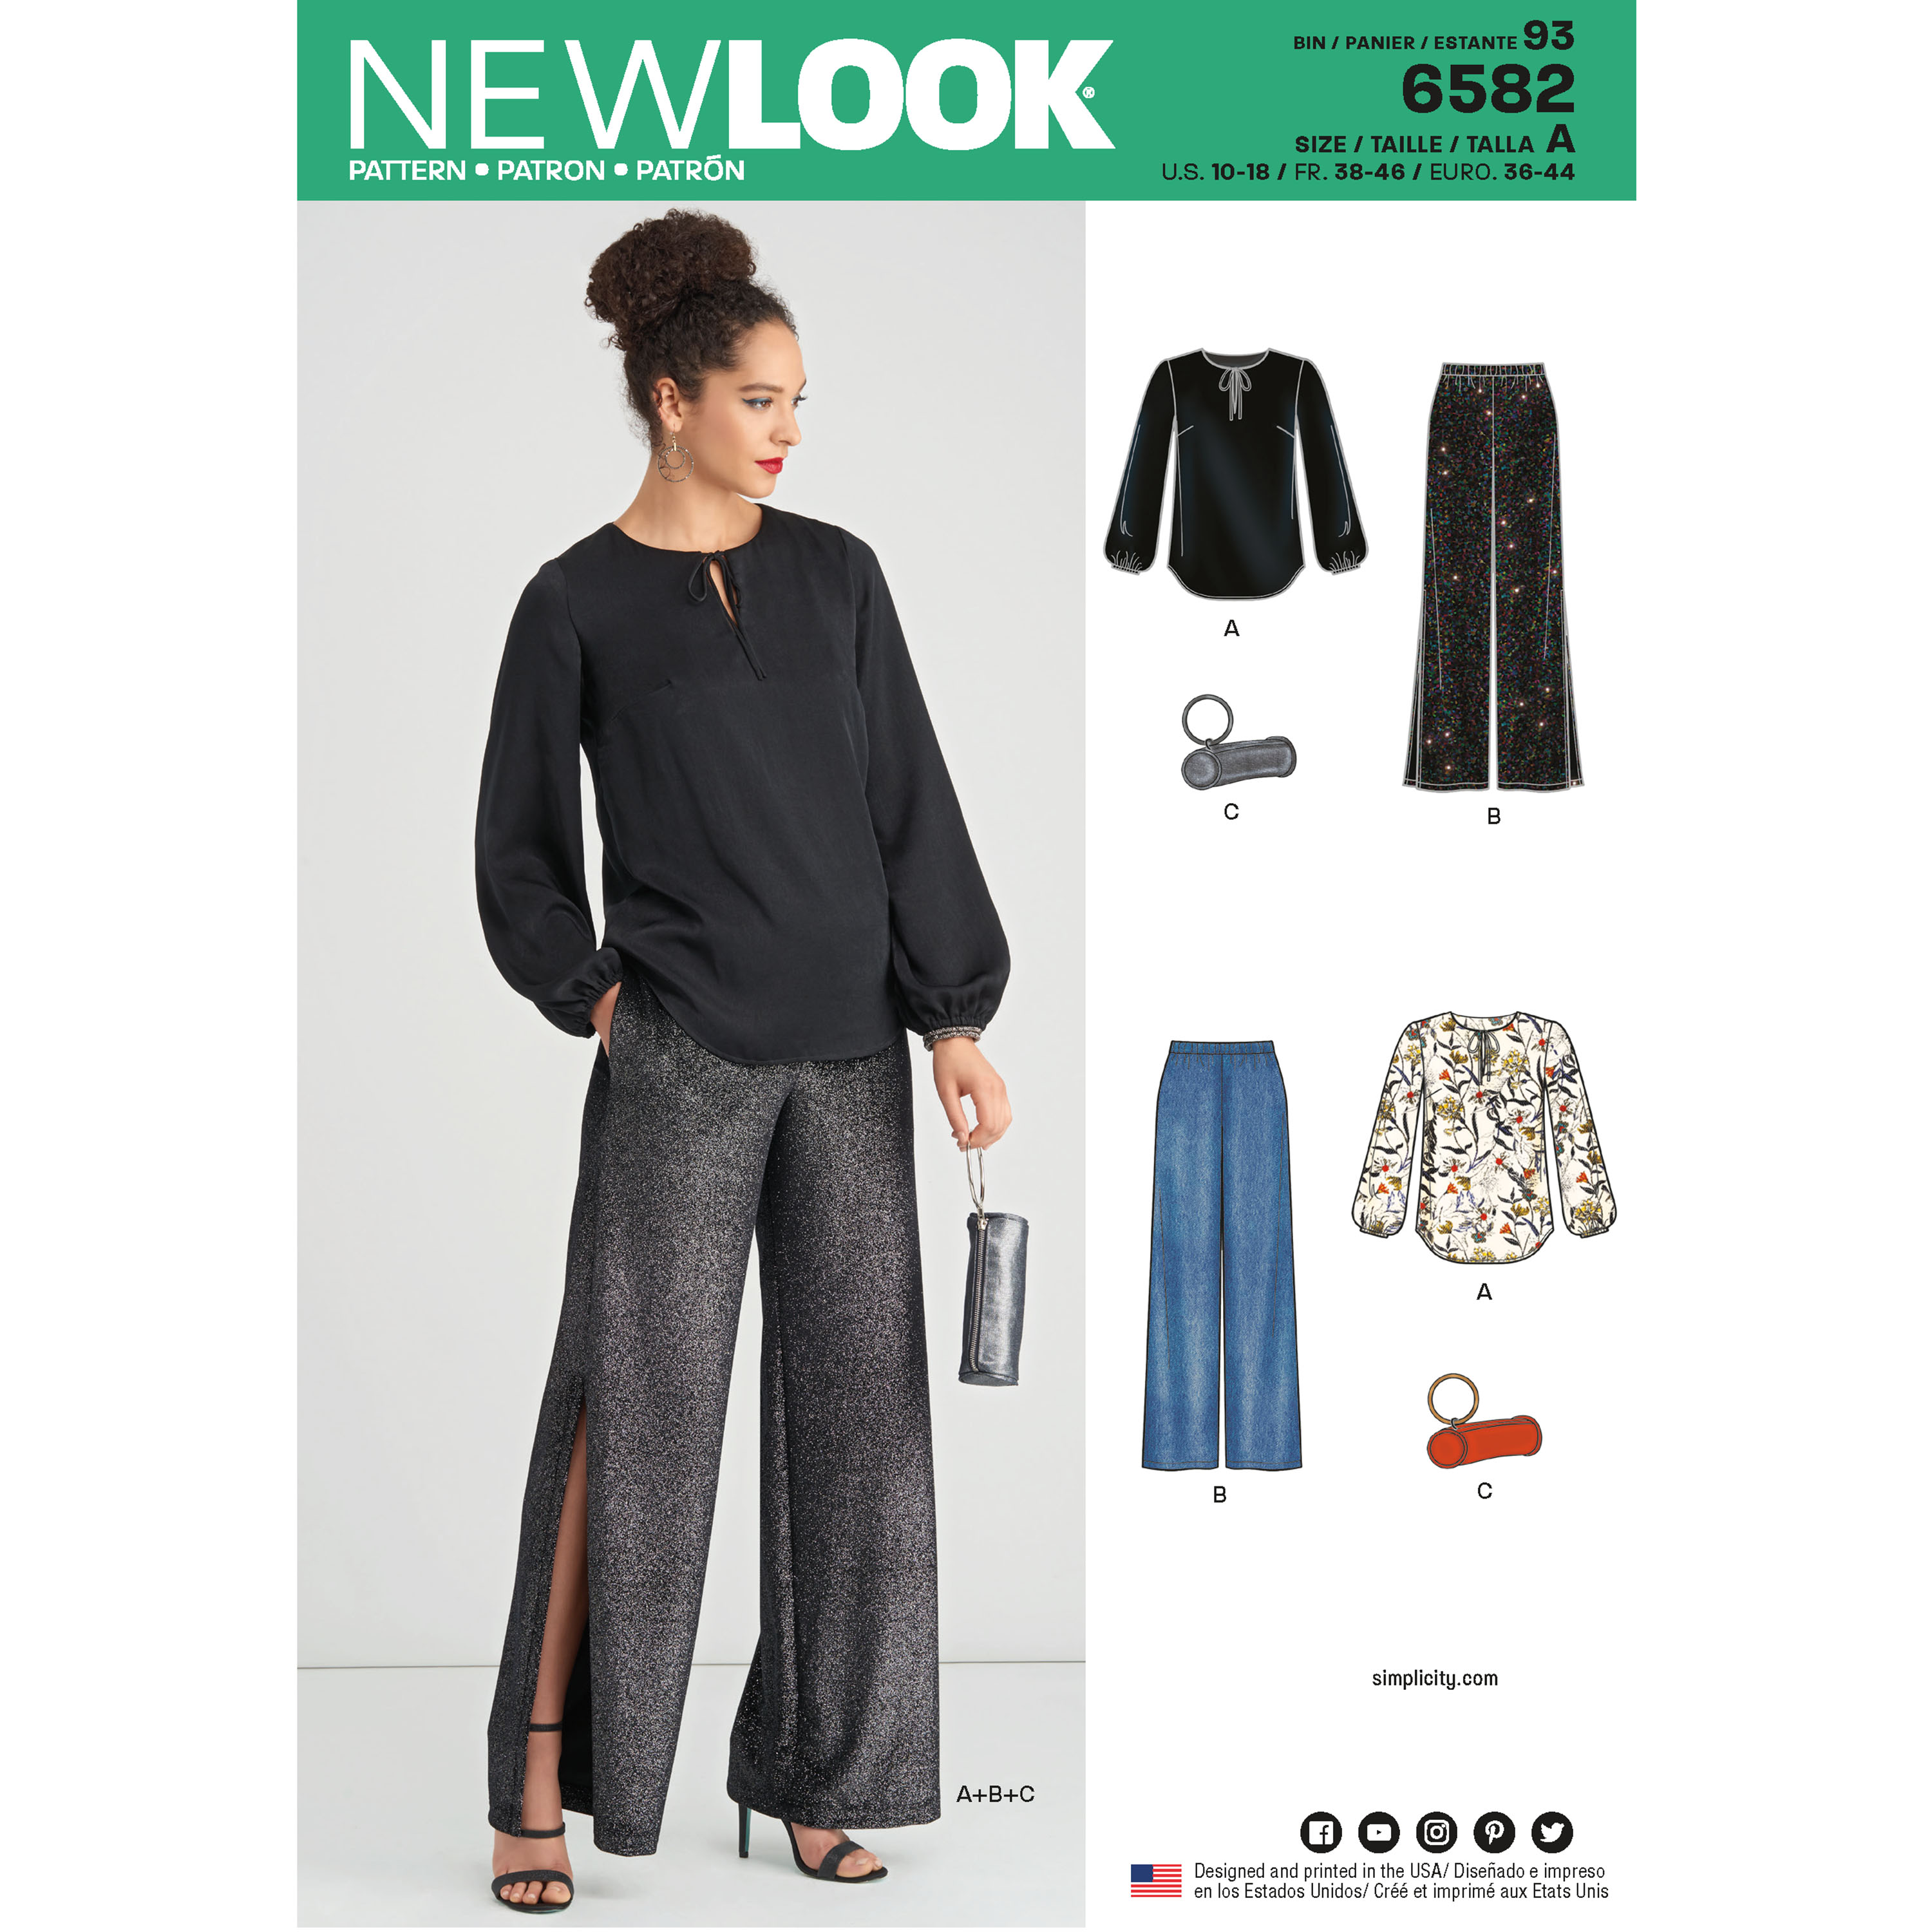 New Look 6582 Misses' Pants, Top and Clutch